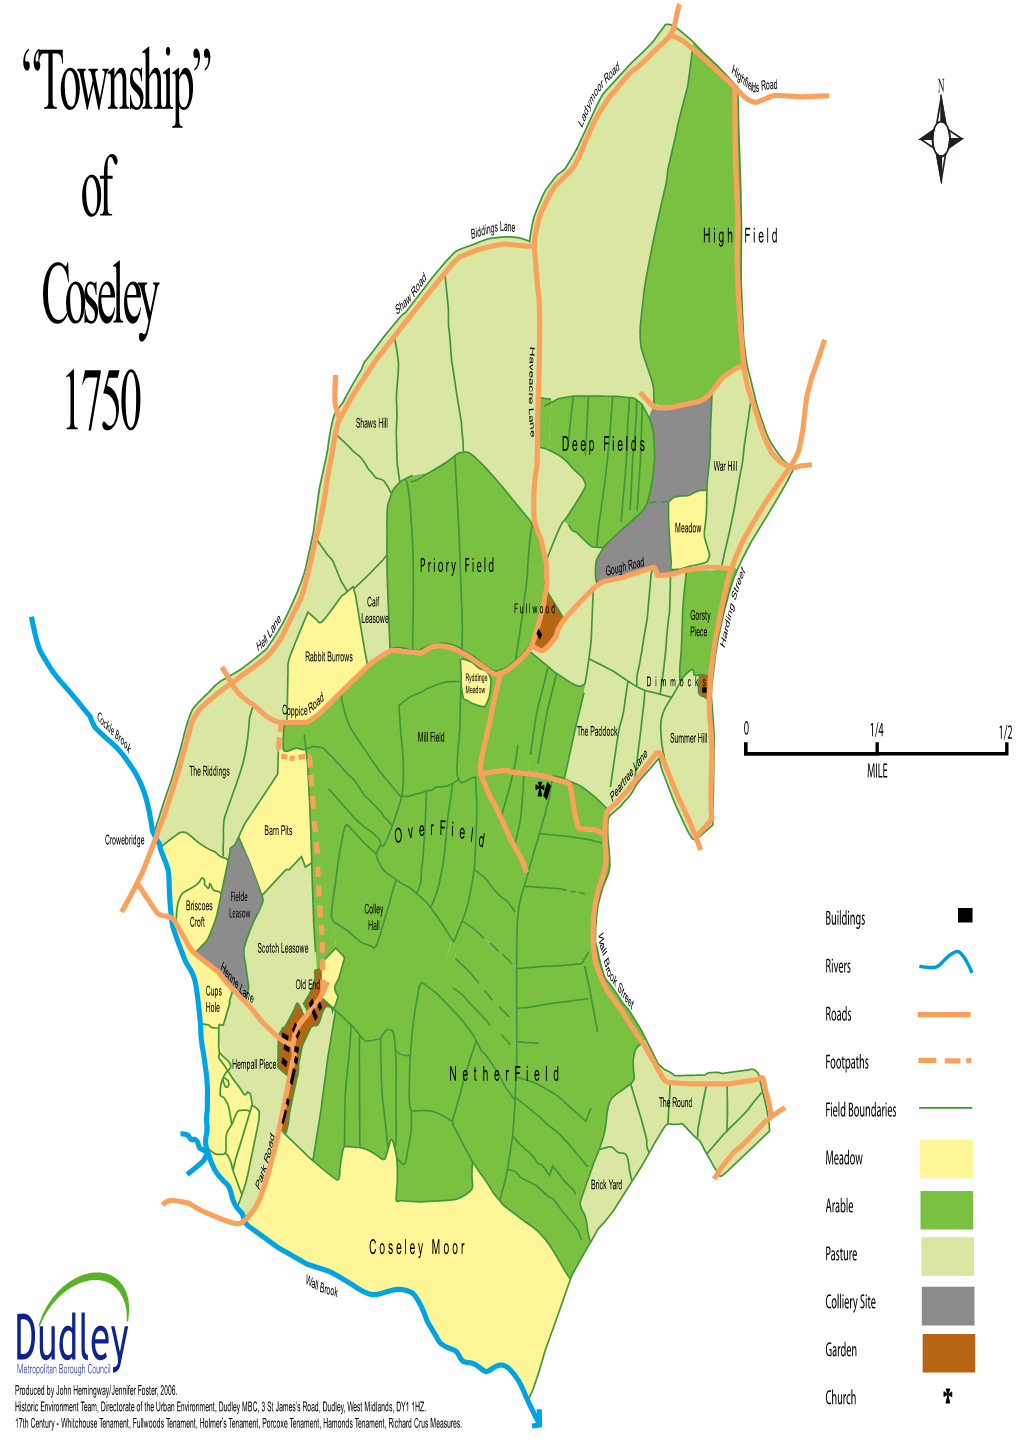 “Township” of Coseley 1750